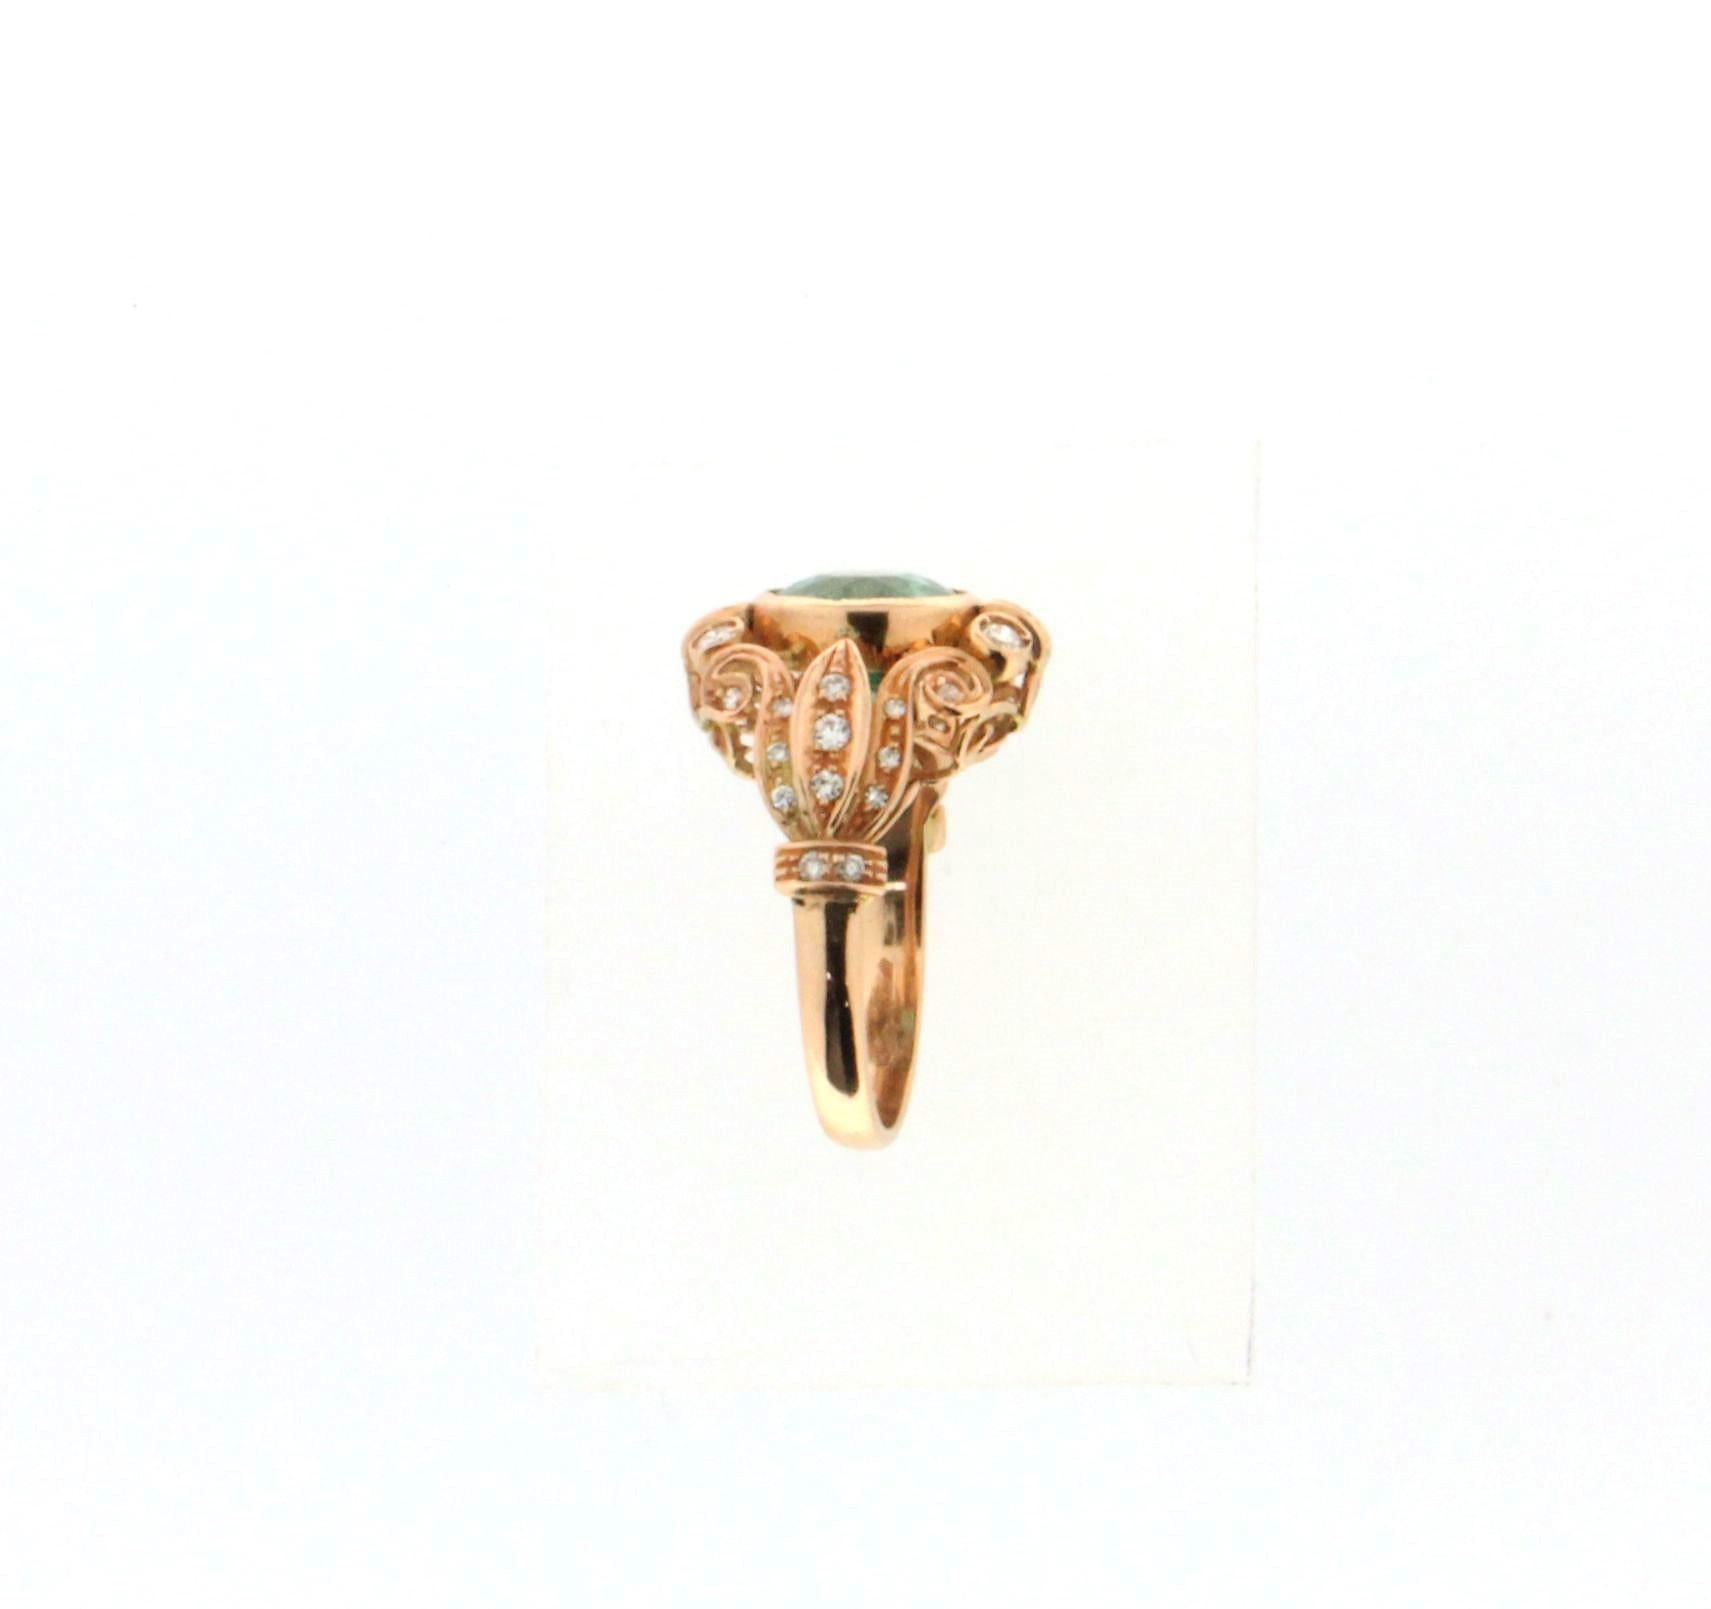 14 karat yellow gold cocktail ring. Handmade by our artisans assembled with Colombian emerald and diamonds

Ring total weight 6.50 grams
Emerald weight 3.24 karat
Diamonds total weight 0.48 karat
Ring size 17.50 Ita 8.25 Us
(all rings are can be